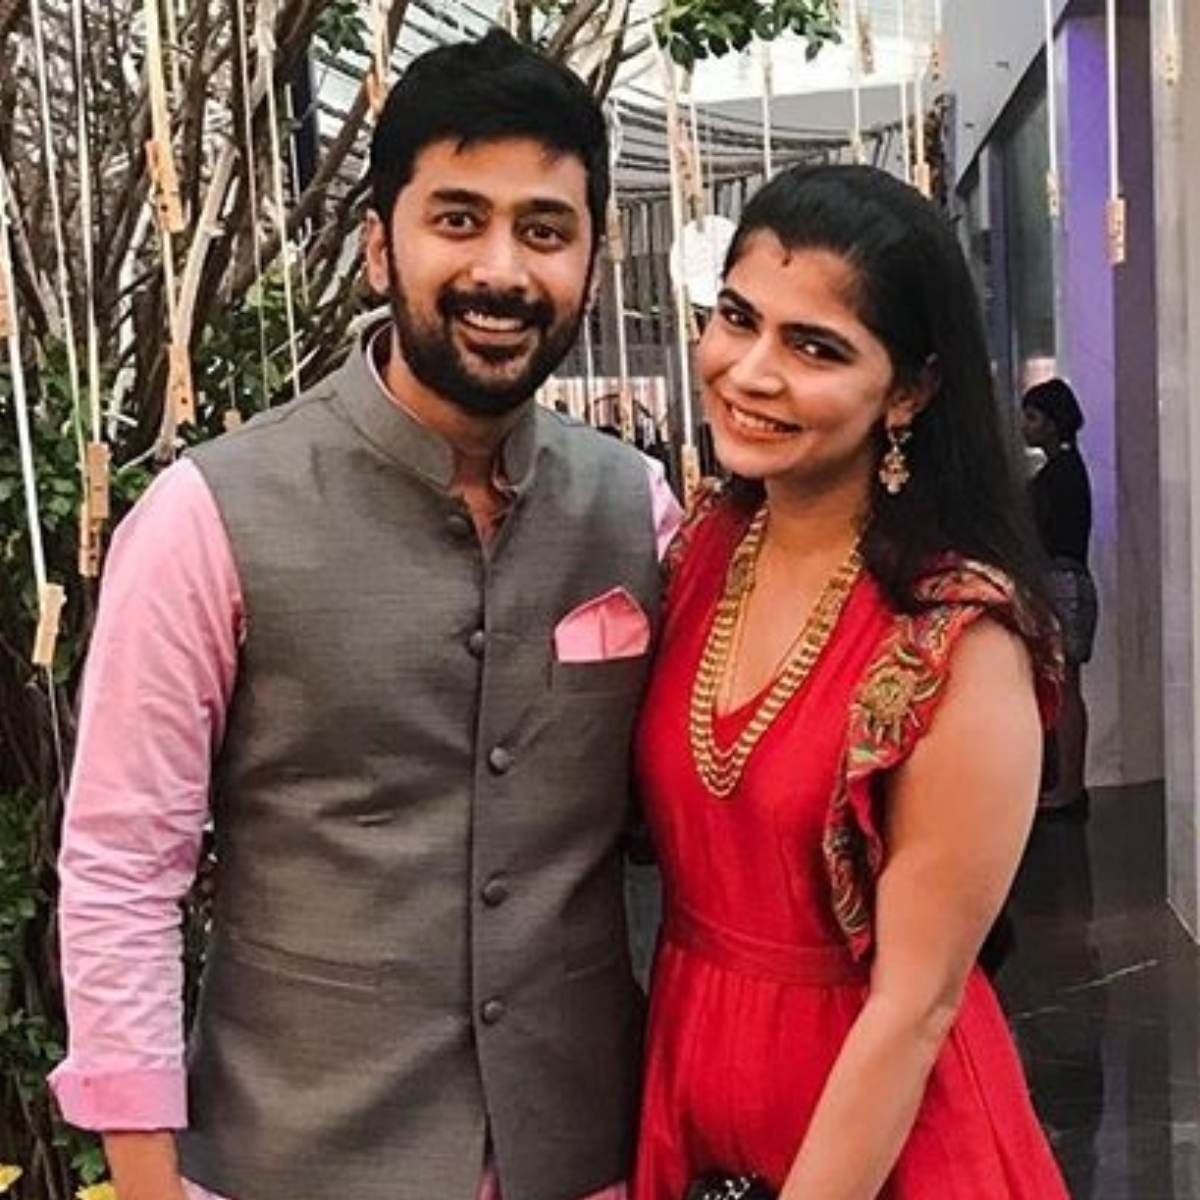 Chinmayi Sripada and Rahul Ravindran blessed with twins; Fans ask if they  are born through surrogacy | PINKVILLA